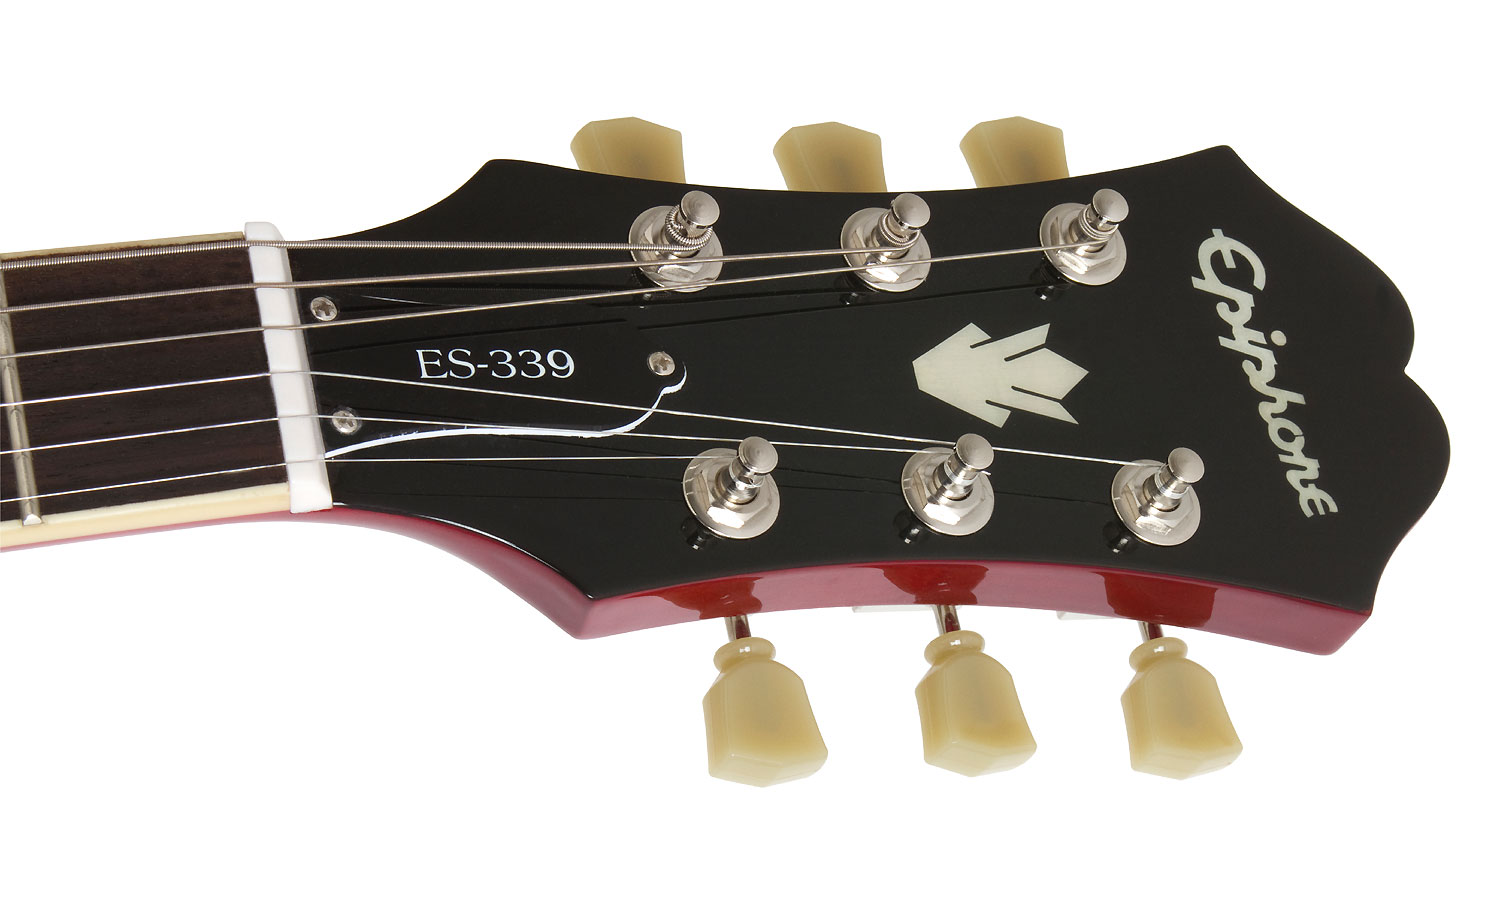 Epiphone Es-339 Inspired By Gibson 2020 2h Ht Rw - Cherry - Semi-Hollow E-Gitarre - Variation 2